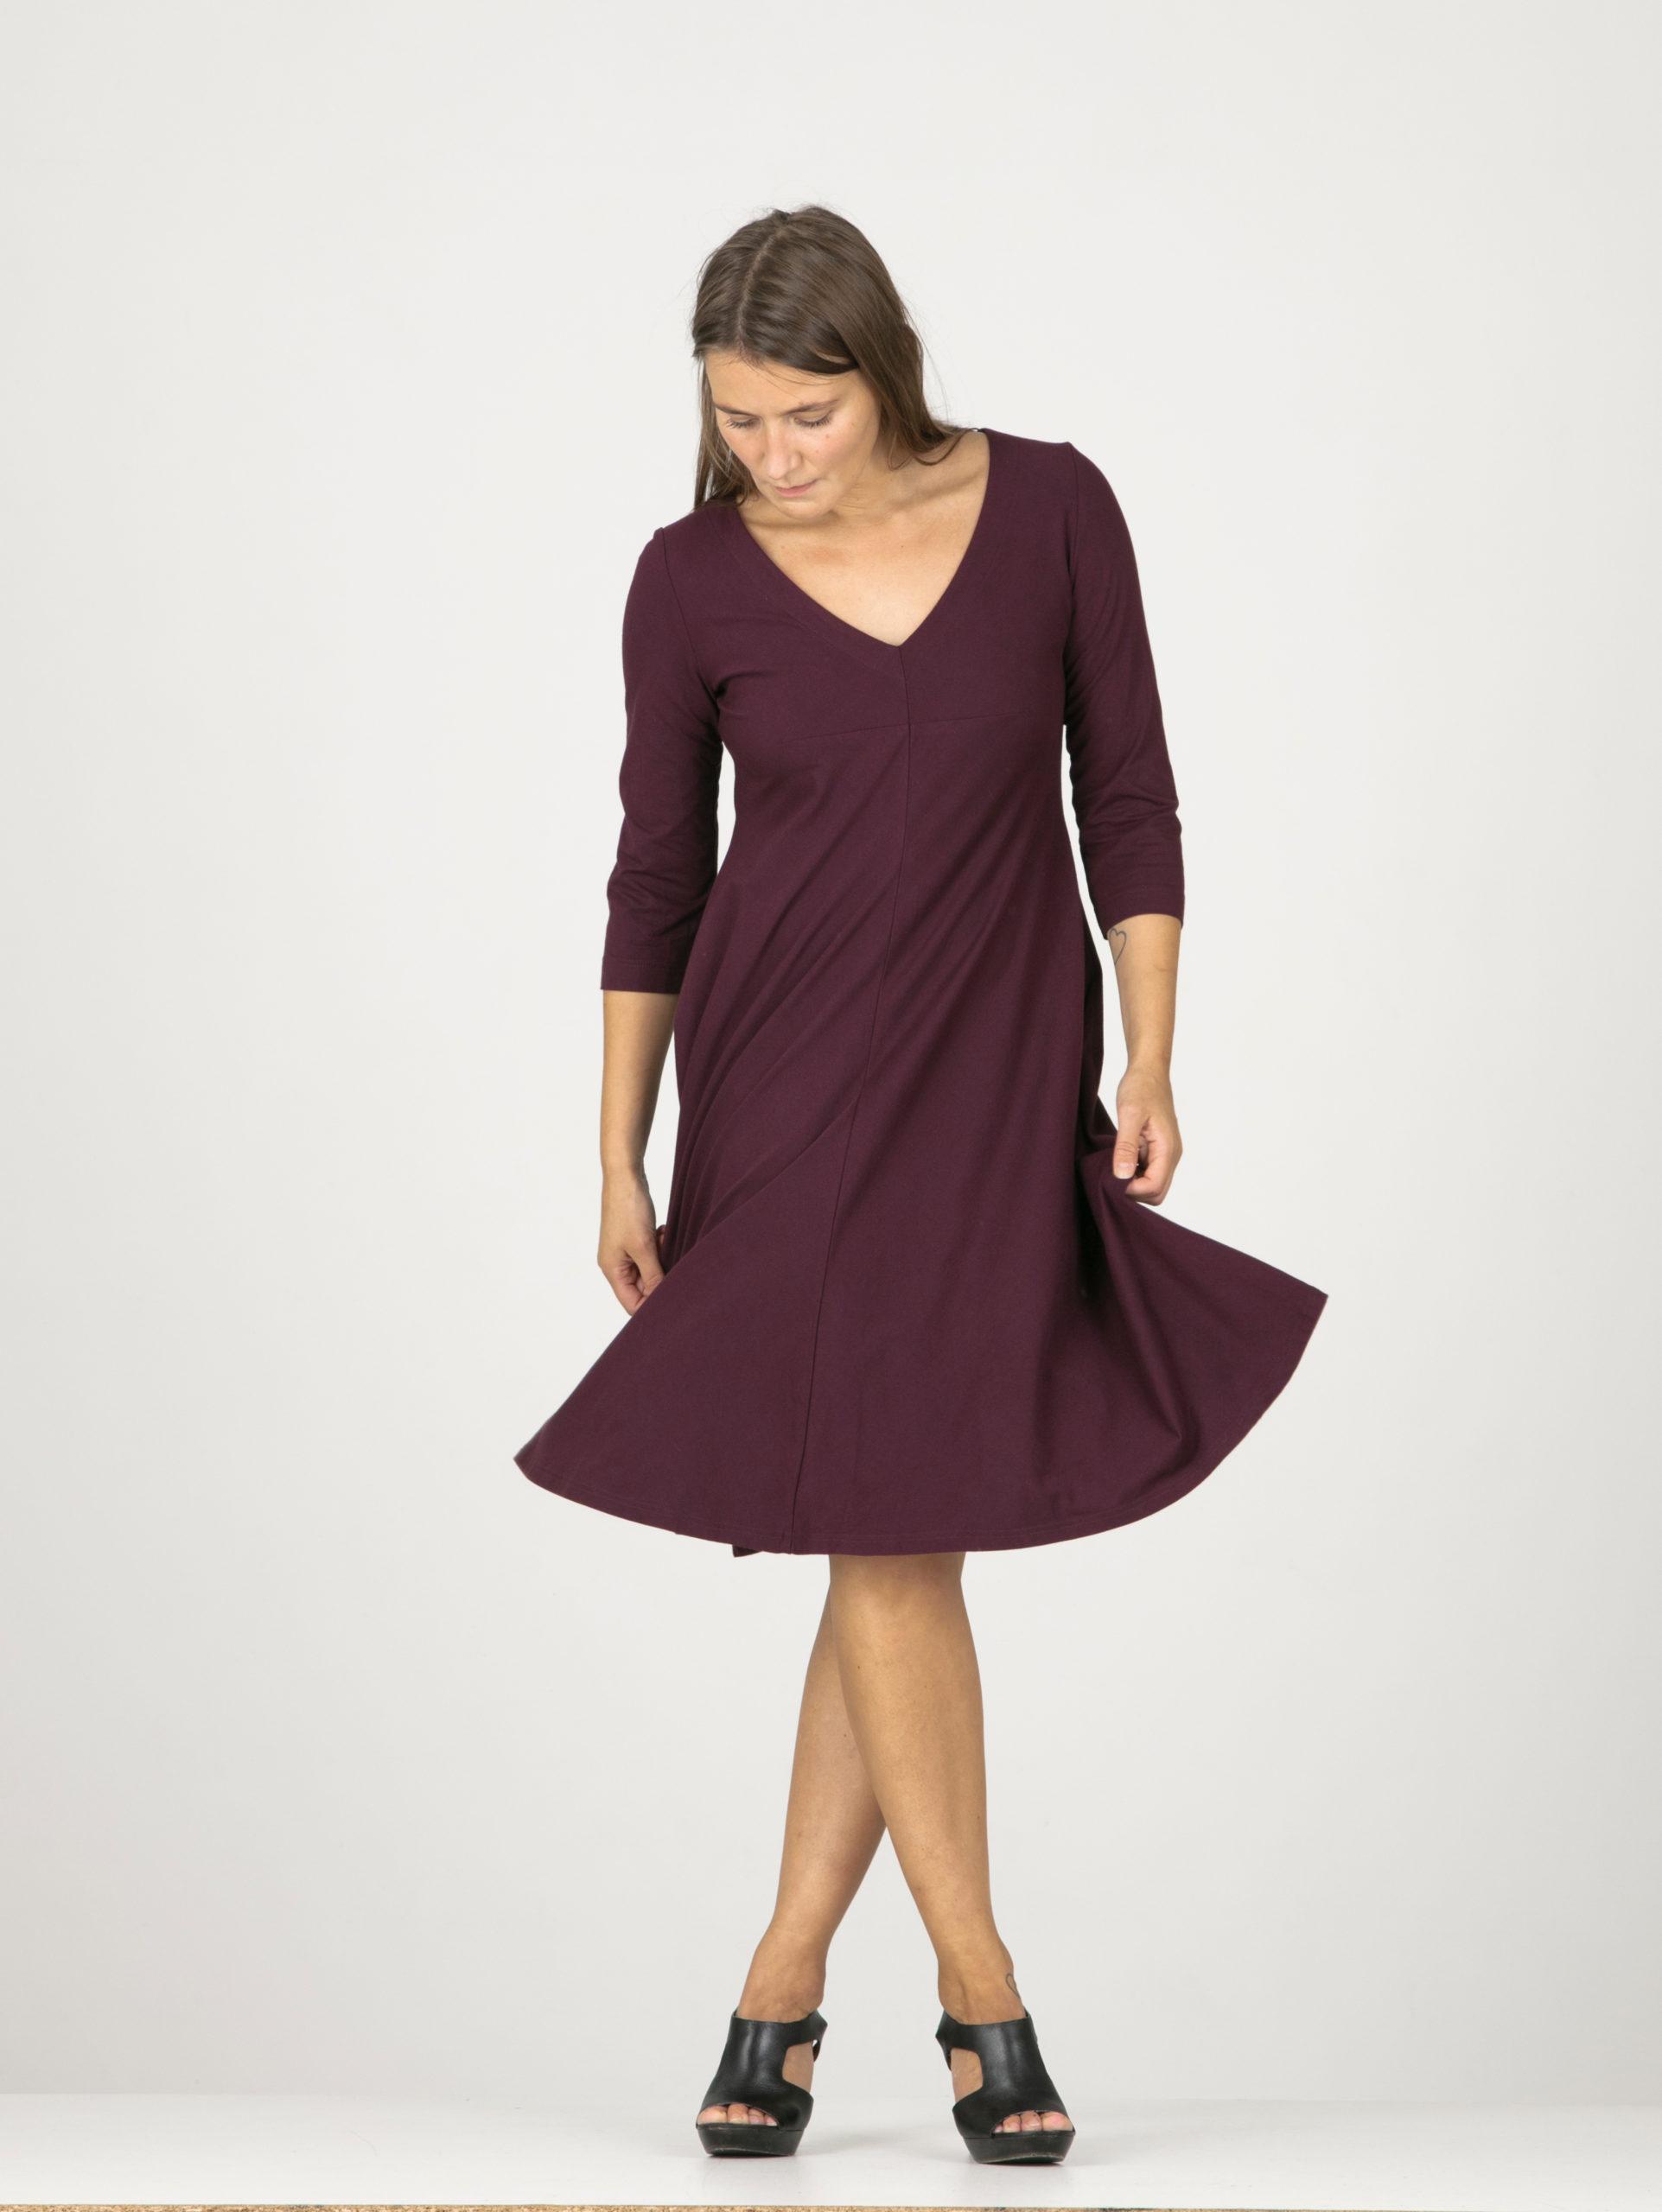 AR 24 Wide dress with 3/4 sleeves